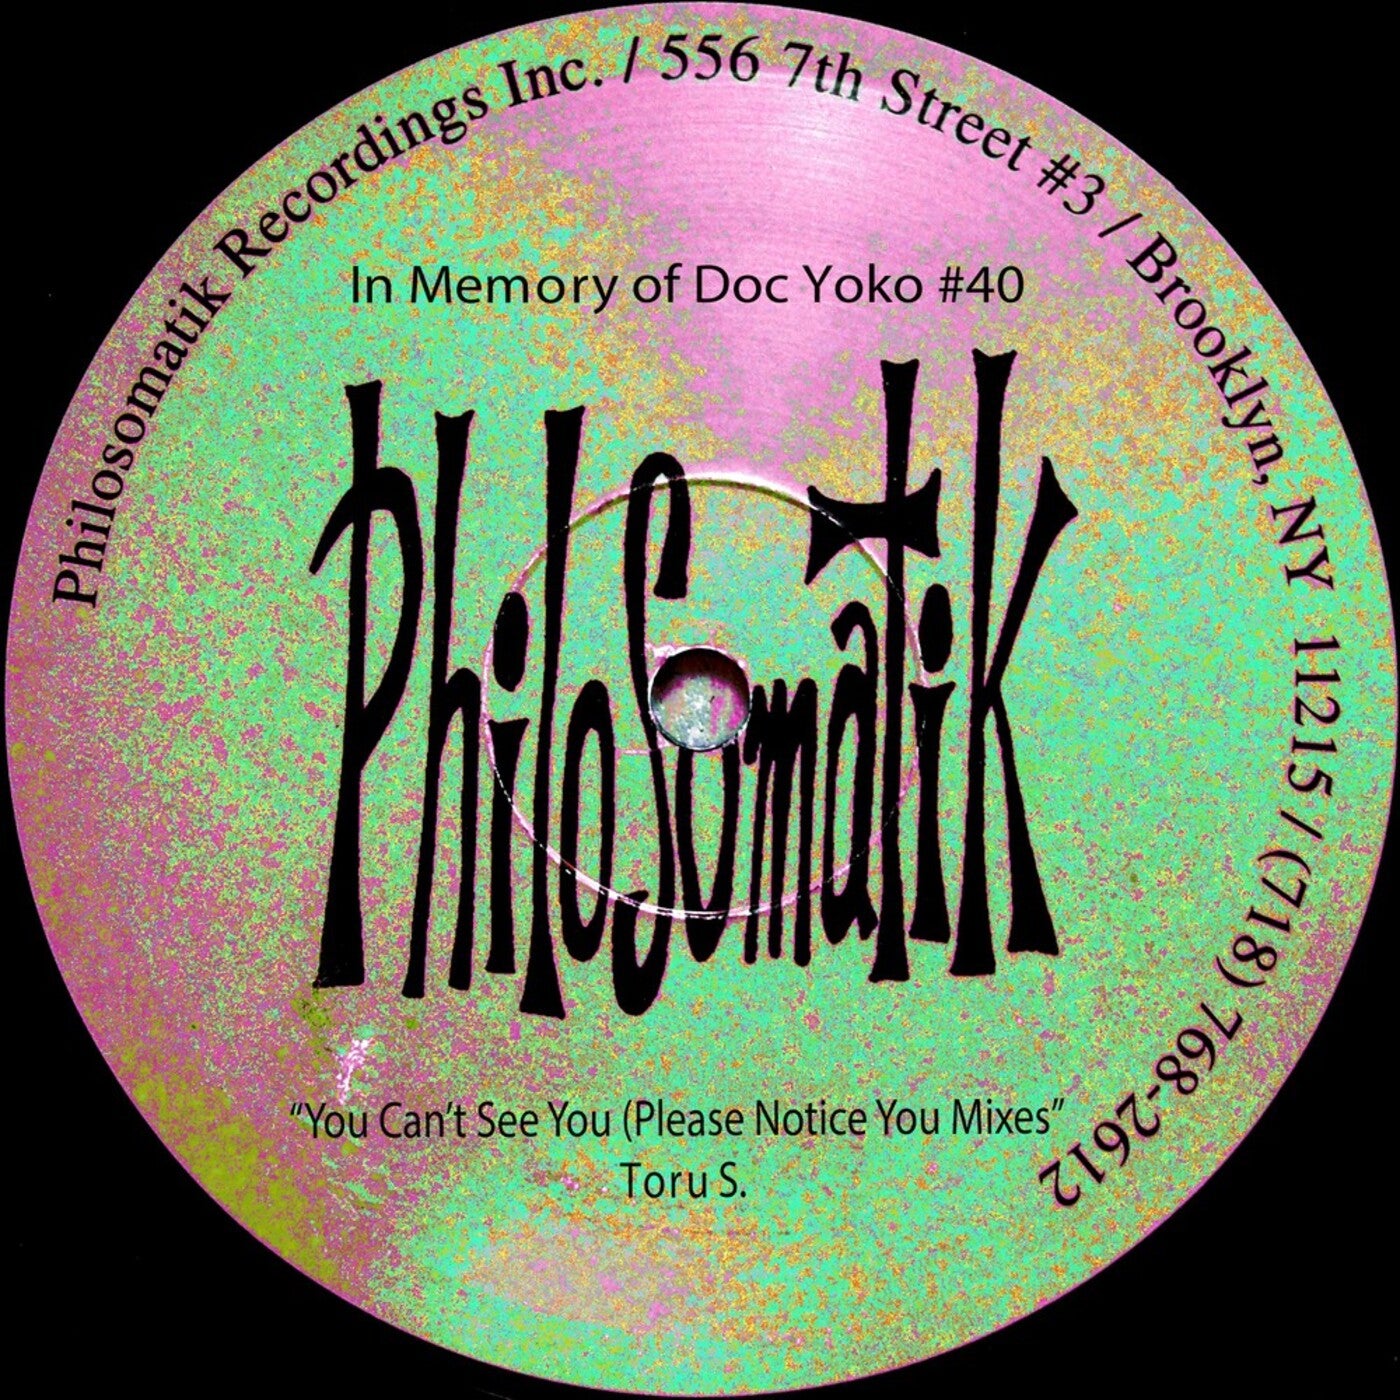 In Memory Of Doc Yoko #40 : You Can't See You (Please Notice You Mixes)